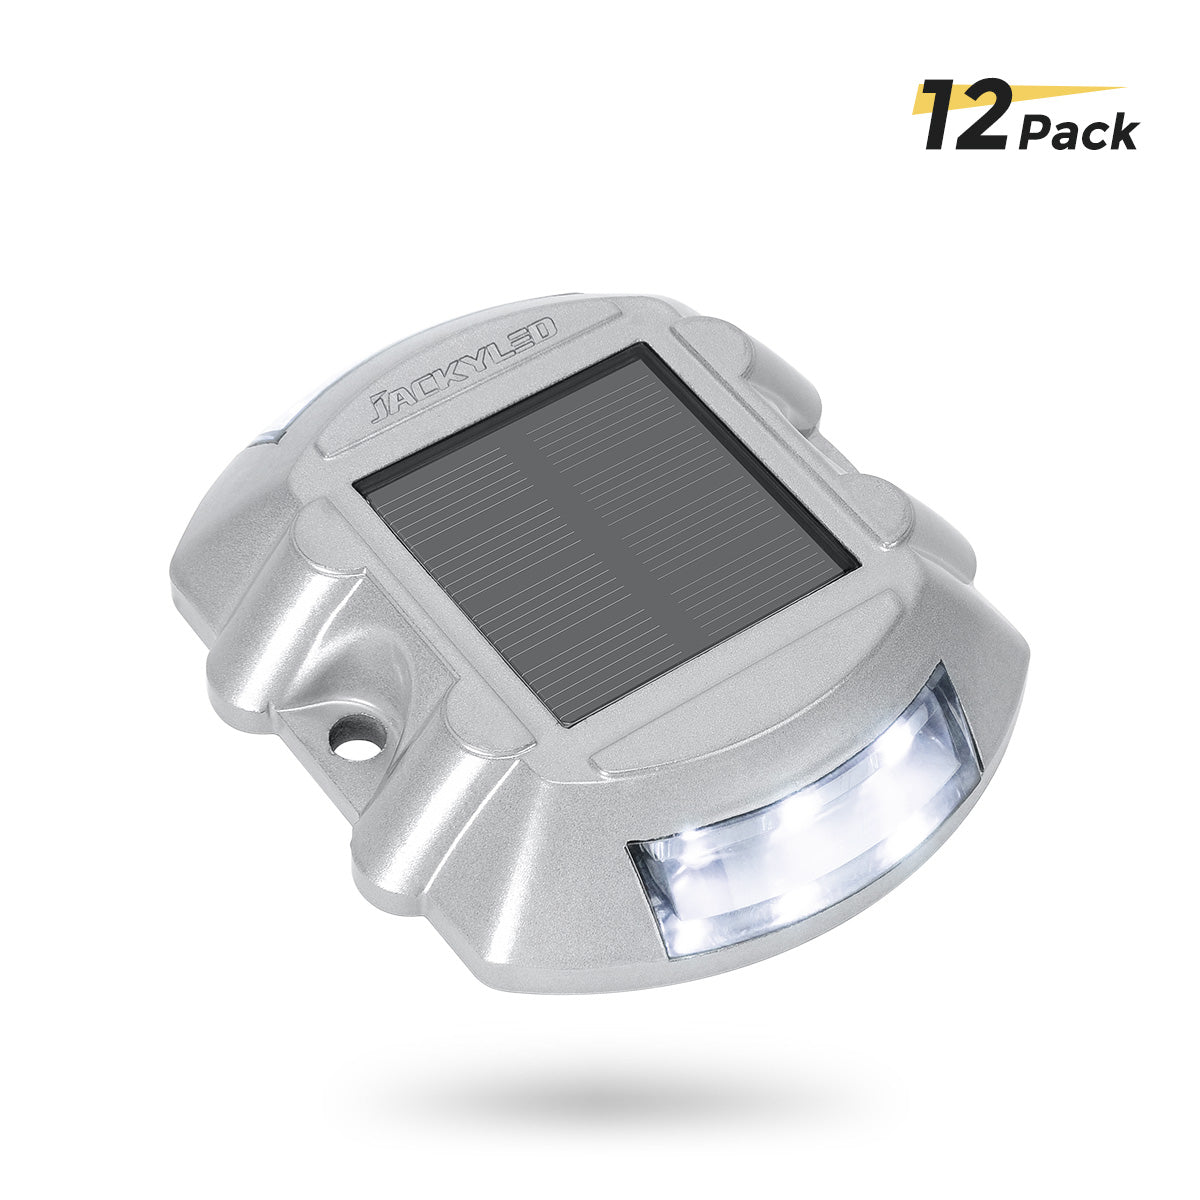 Solar Driveway Marker Lights with Switch LED Deck Lights